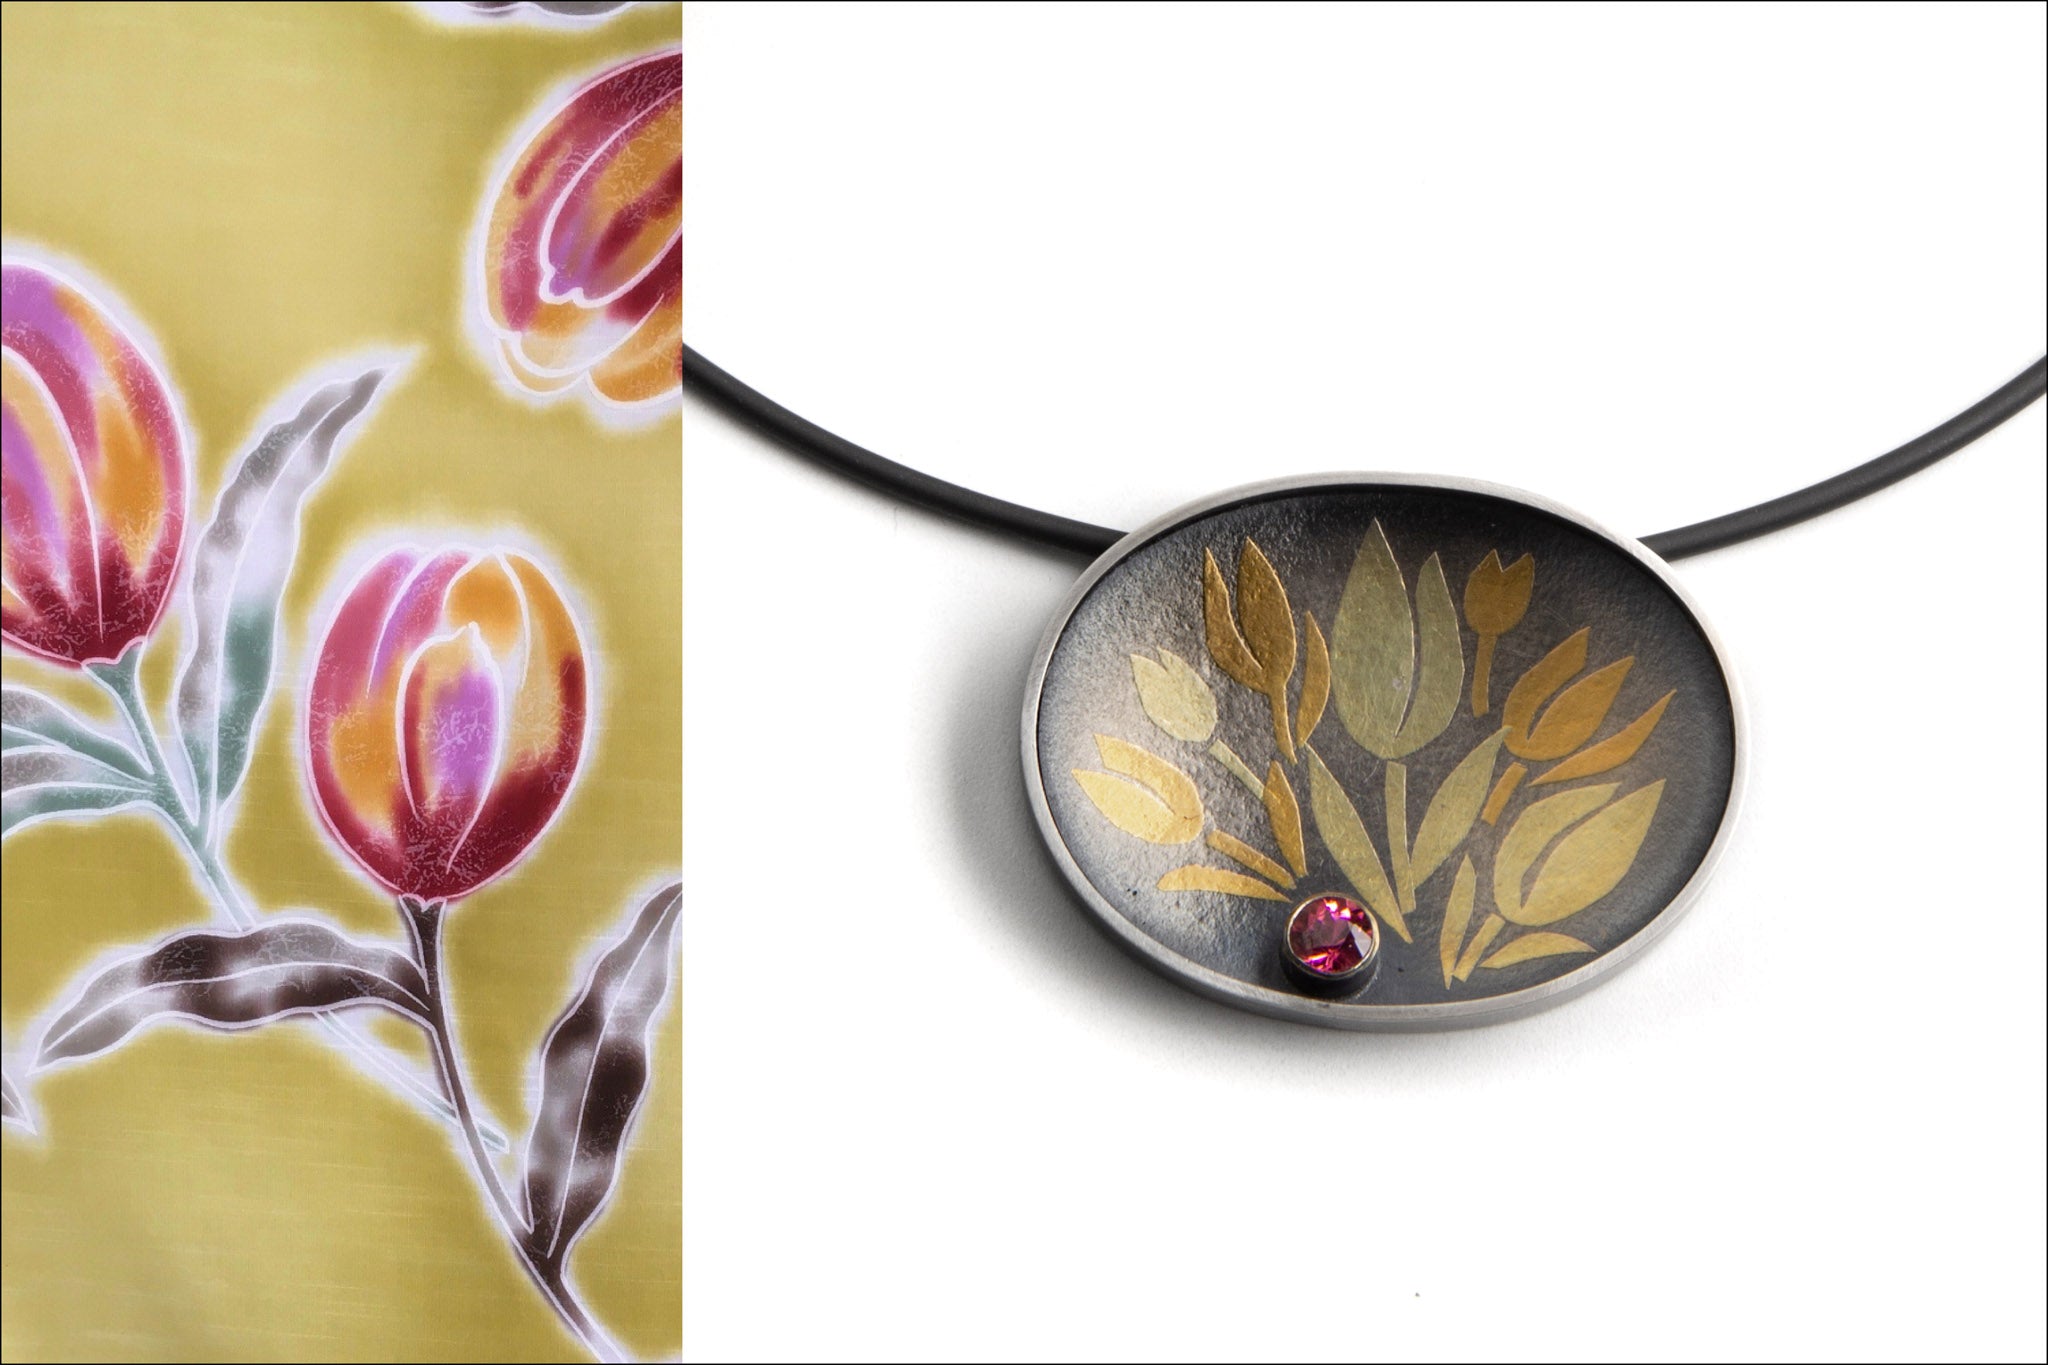 Tulip Mania, a necklace created by Carolina Andersson for the Yukata Jewelry Show 2022—a creative collaboration between Okan Arts and Danaca Design